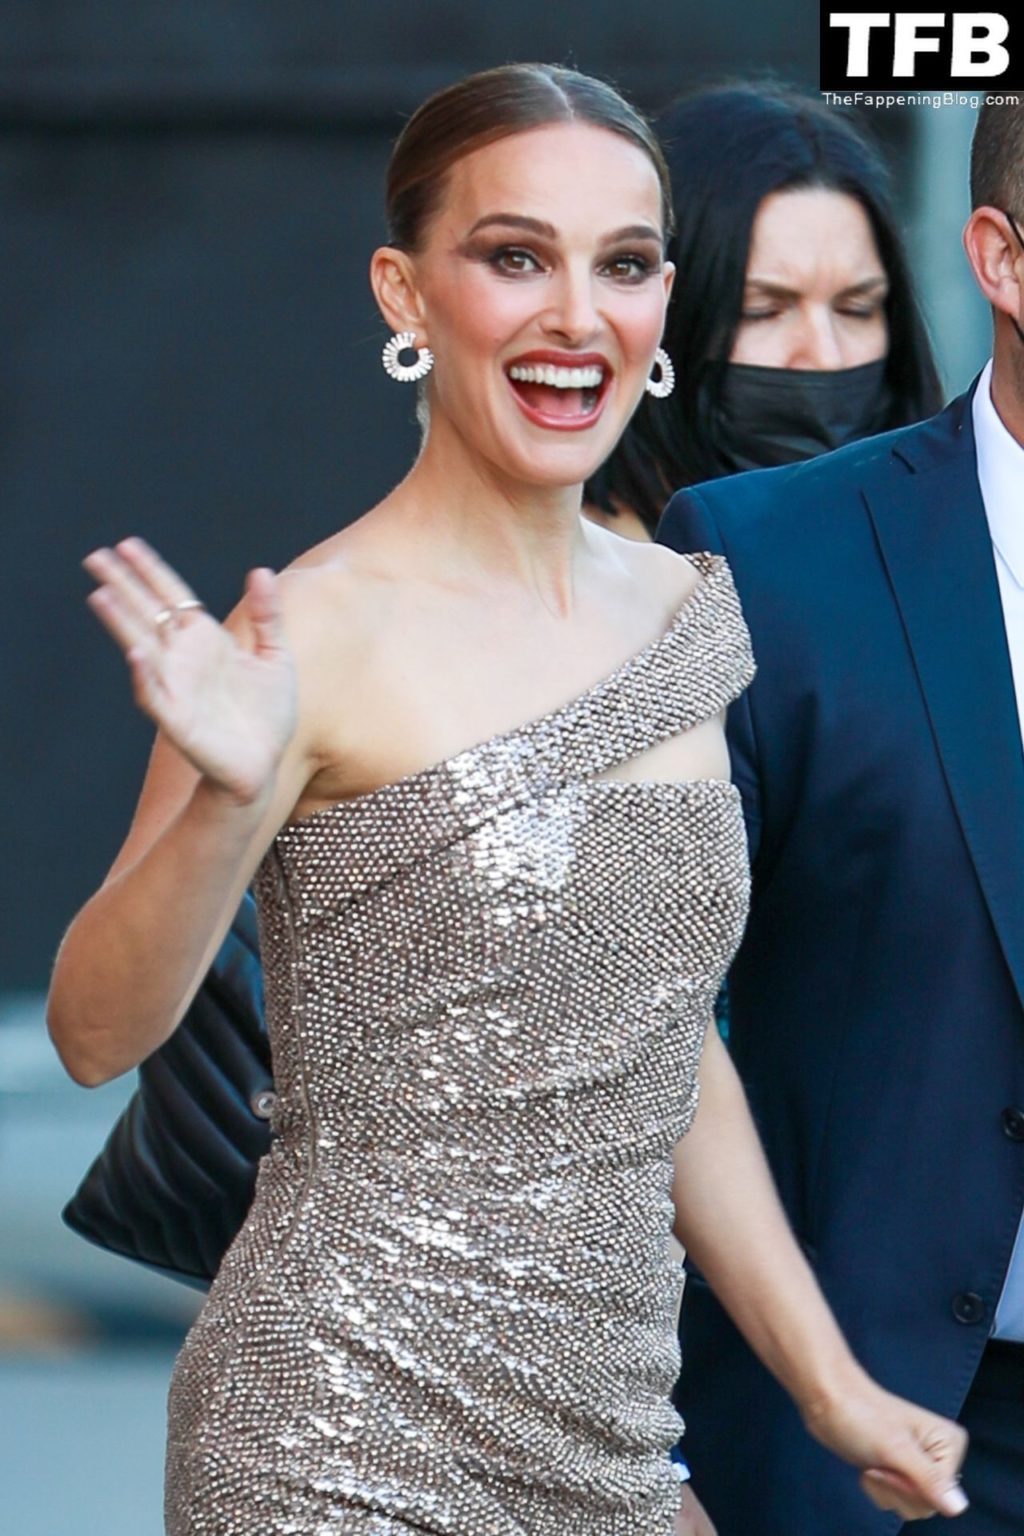 Natalie Portman Looks Hot in a Sequin Dress at Jimmy Kimmel Live! Ahead of Her “Thor” Premiere (11 Photos)